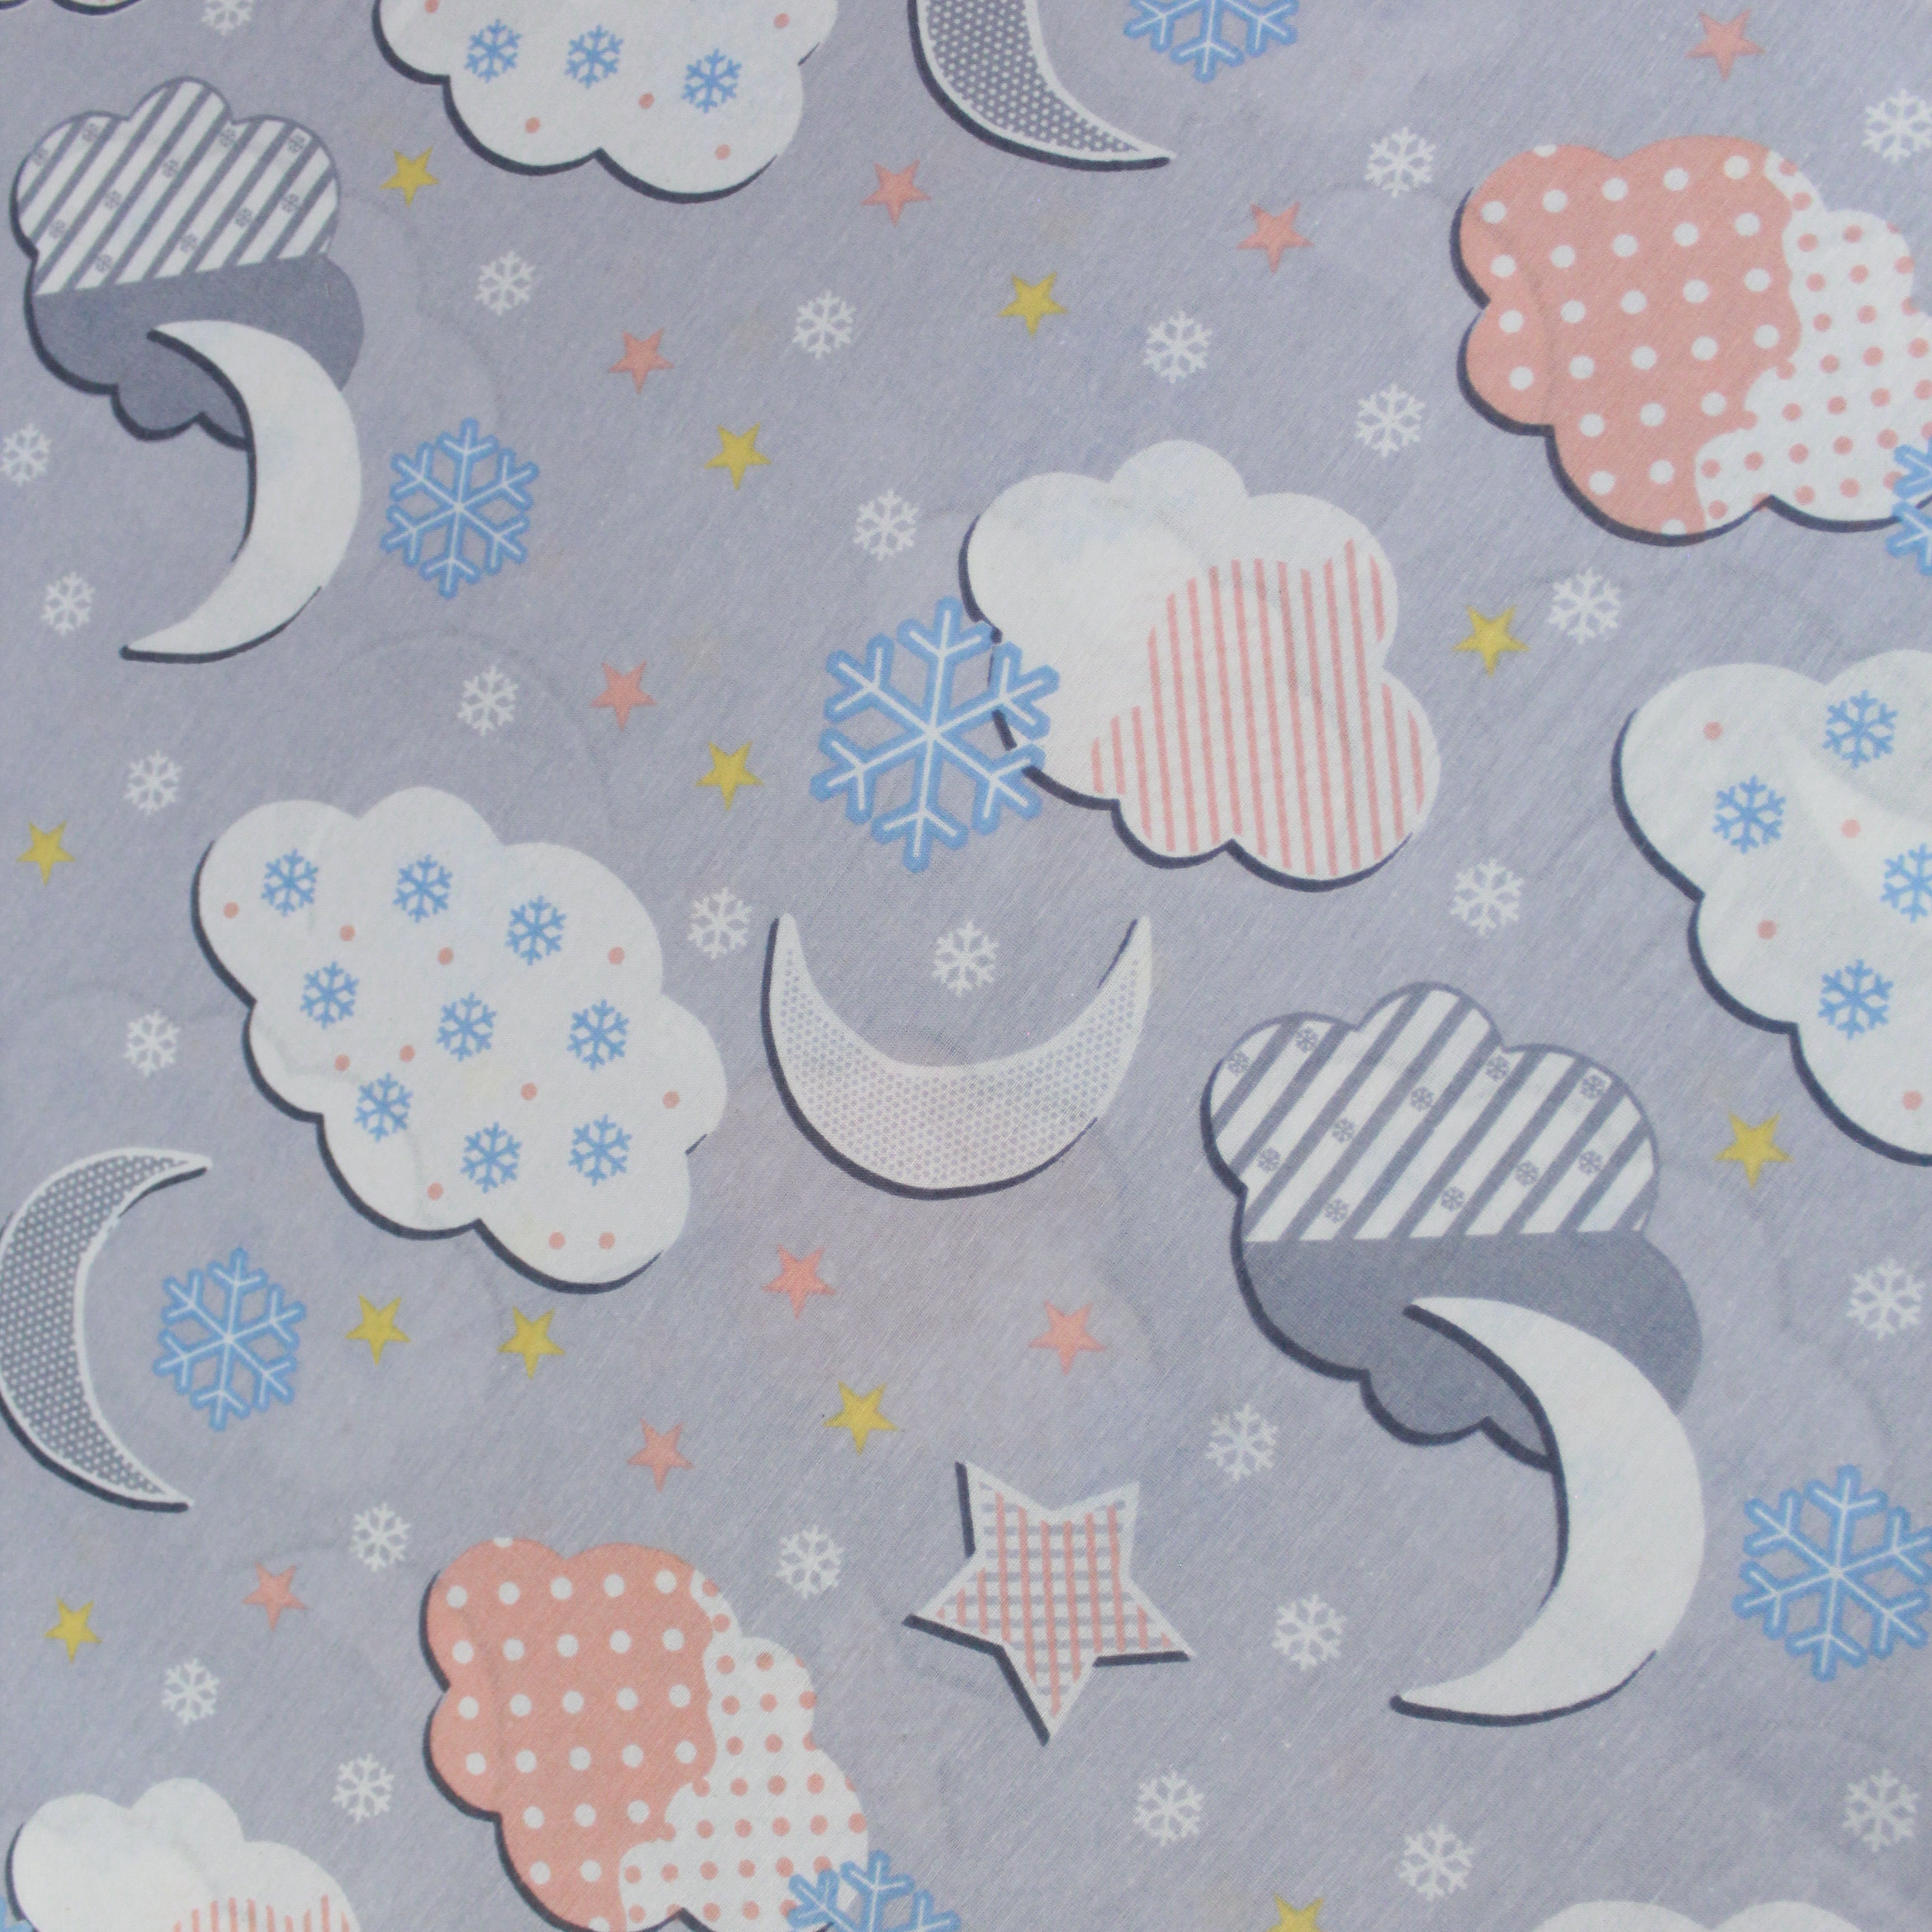 Premium Quality Super Wide Cotton Blend Sheeting "Moon & Clouds" 94" Wide Light Grey